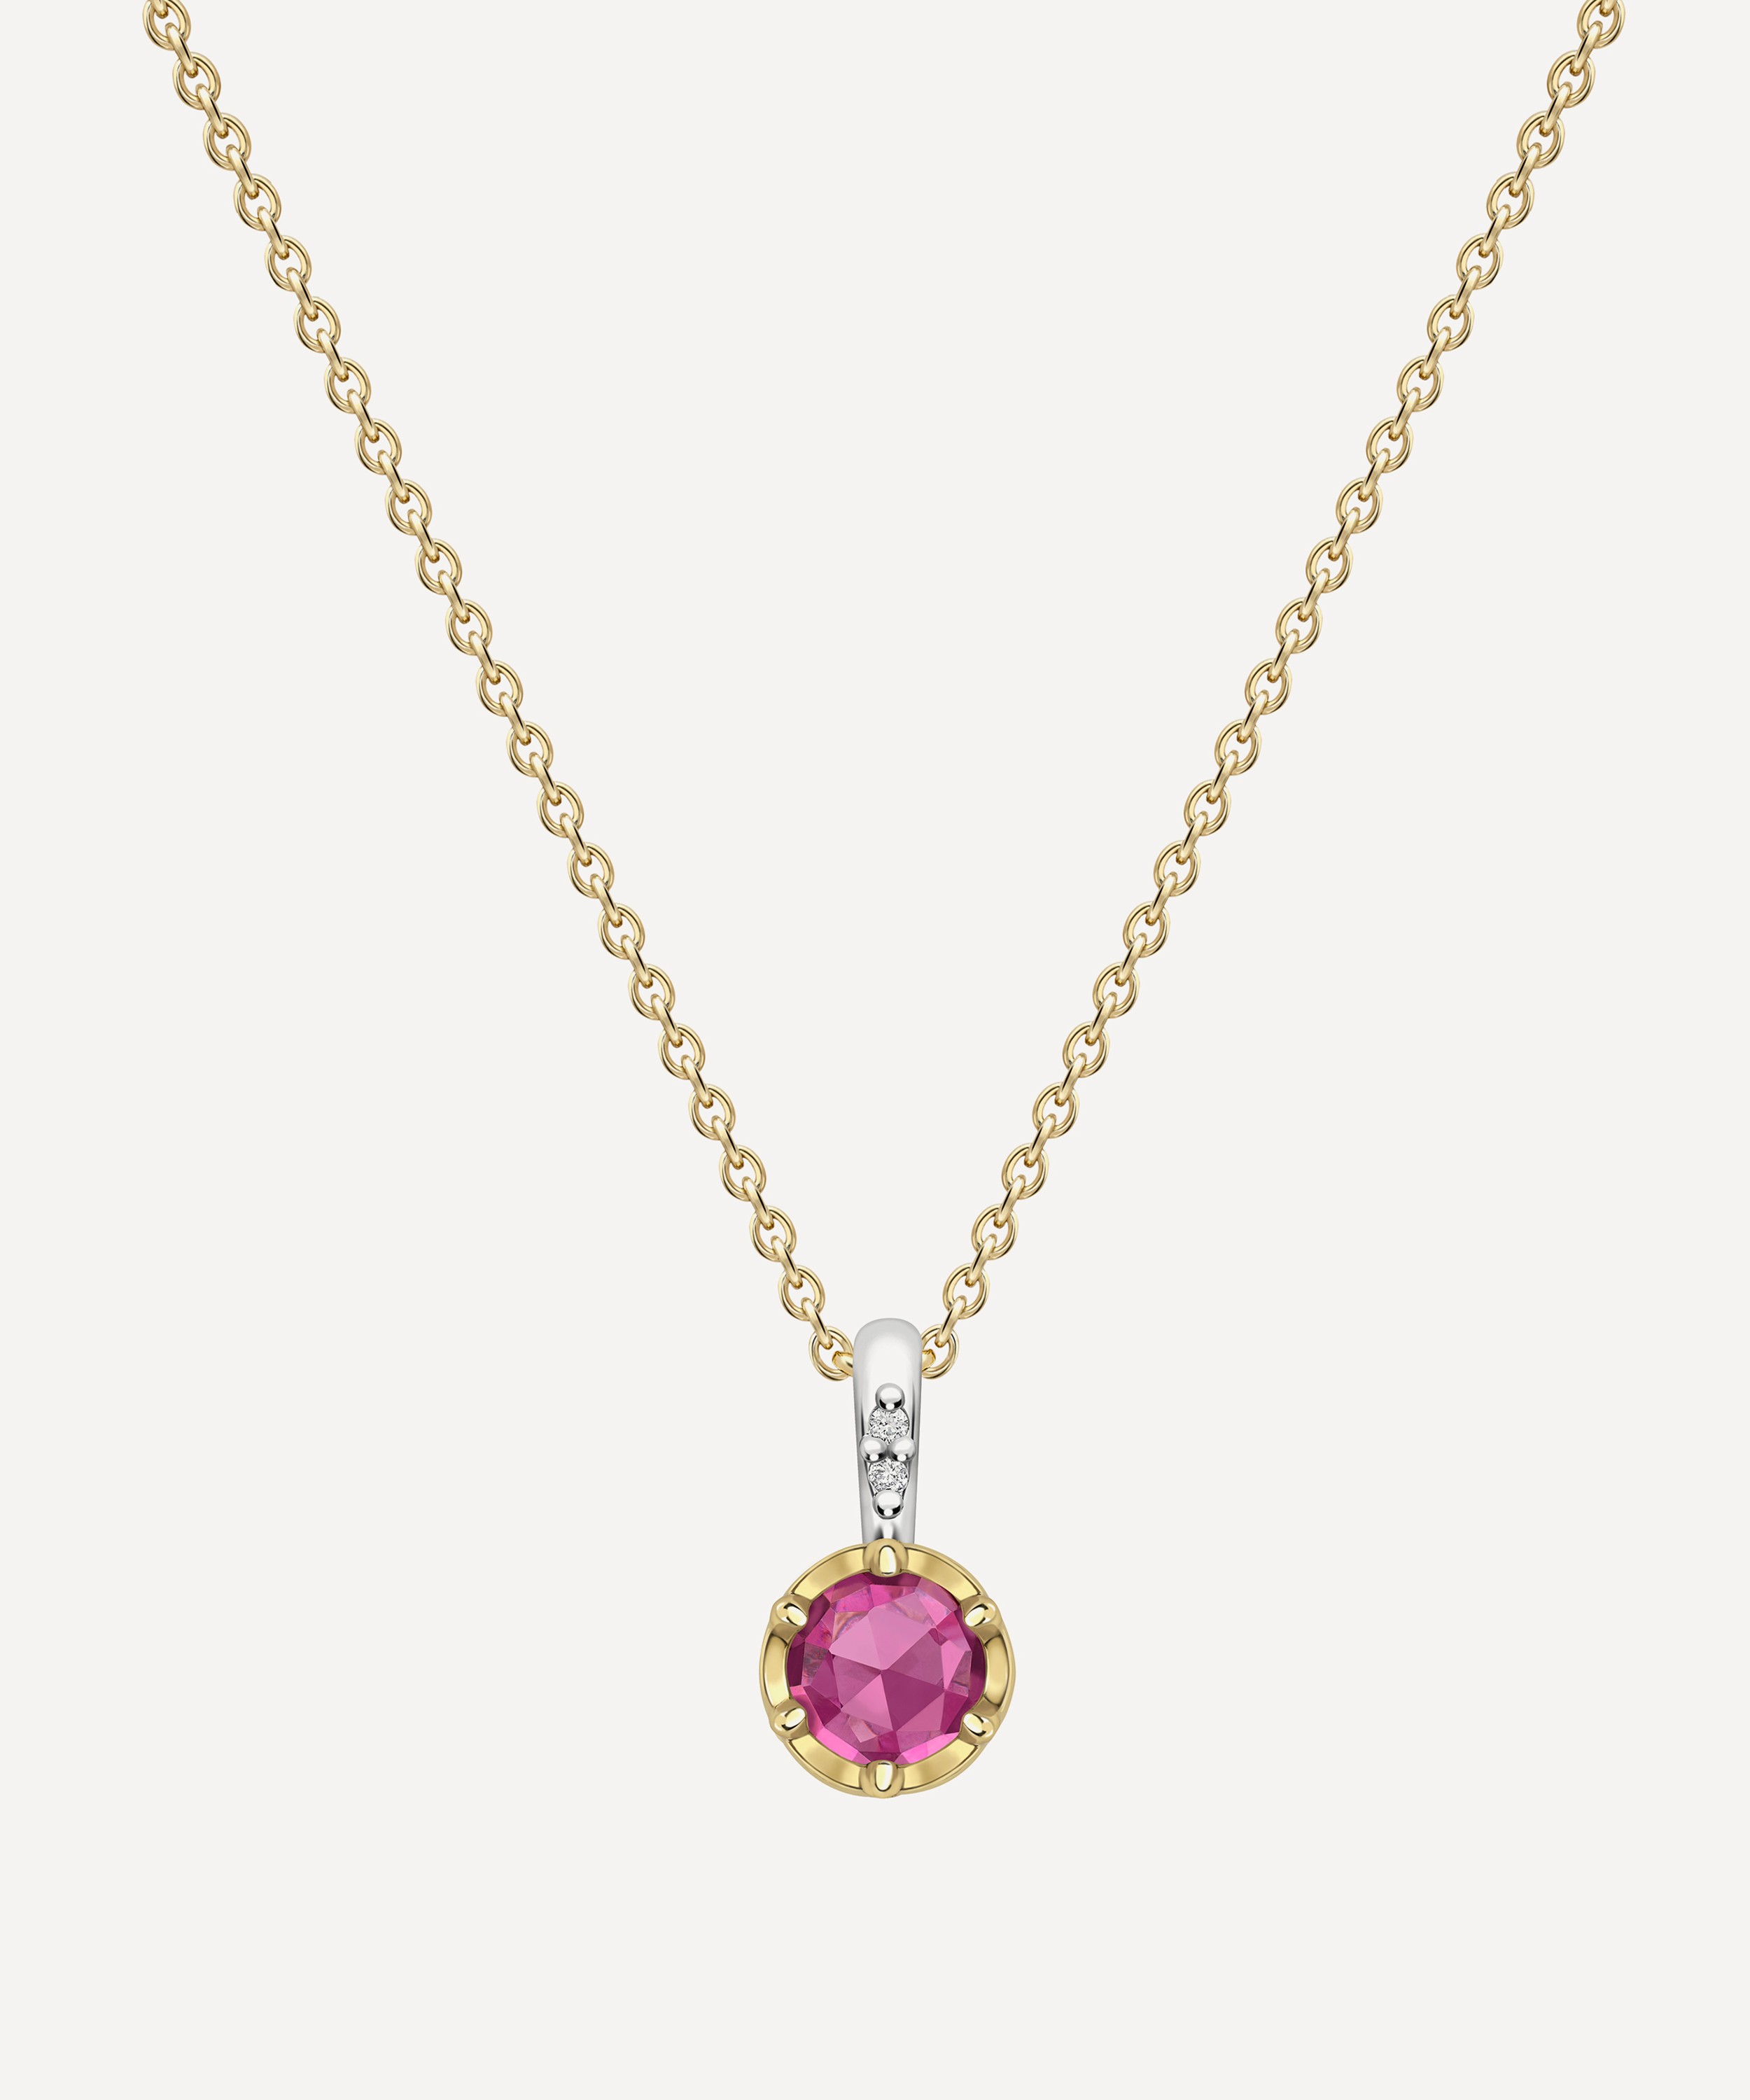 Dinny Hall - 22ct Gold-Plated Vermeil Silver January Garnet Birthstone Pendant Necklace